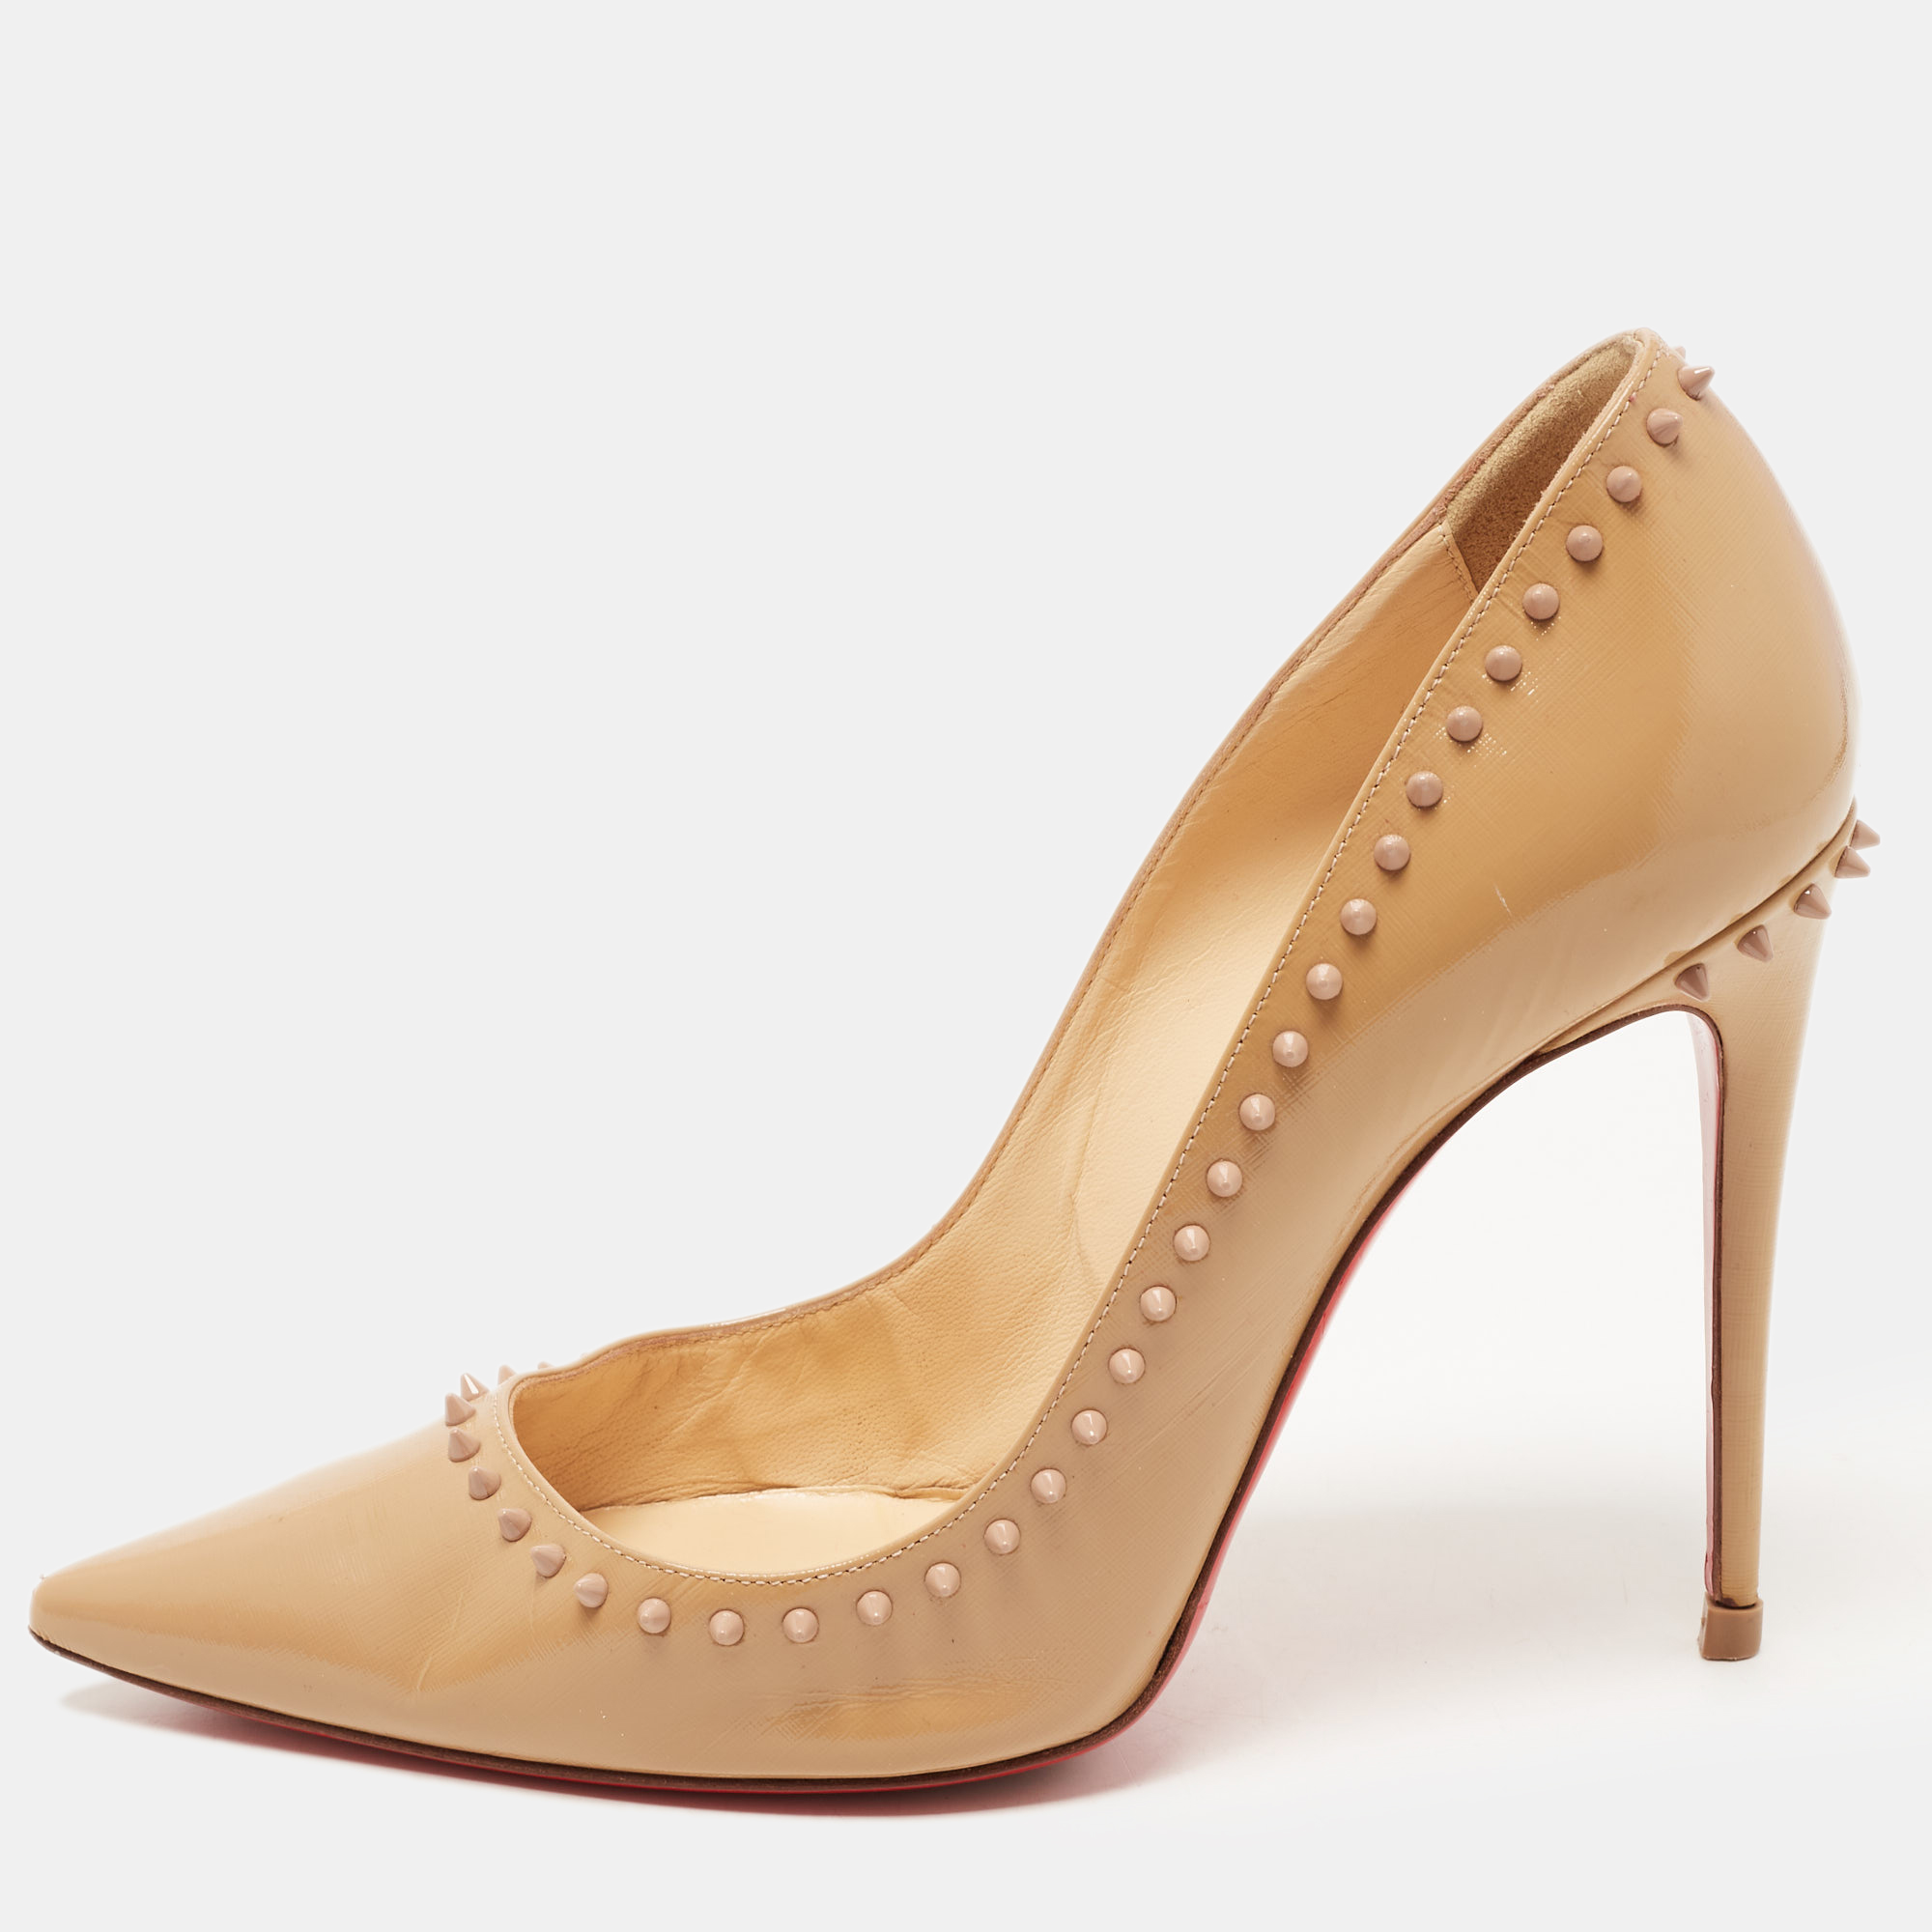 

Christian Louboutin Beige Patent Leather Anjalina Spike Pointed Toe Pumps Size